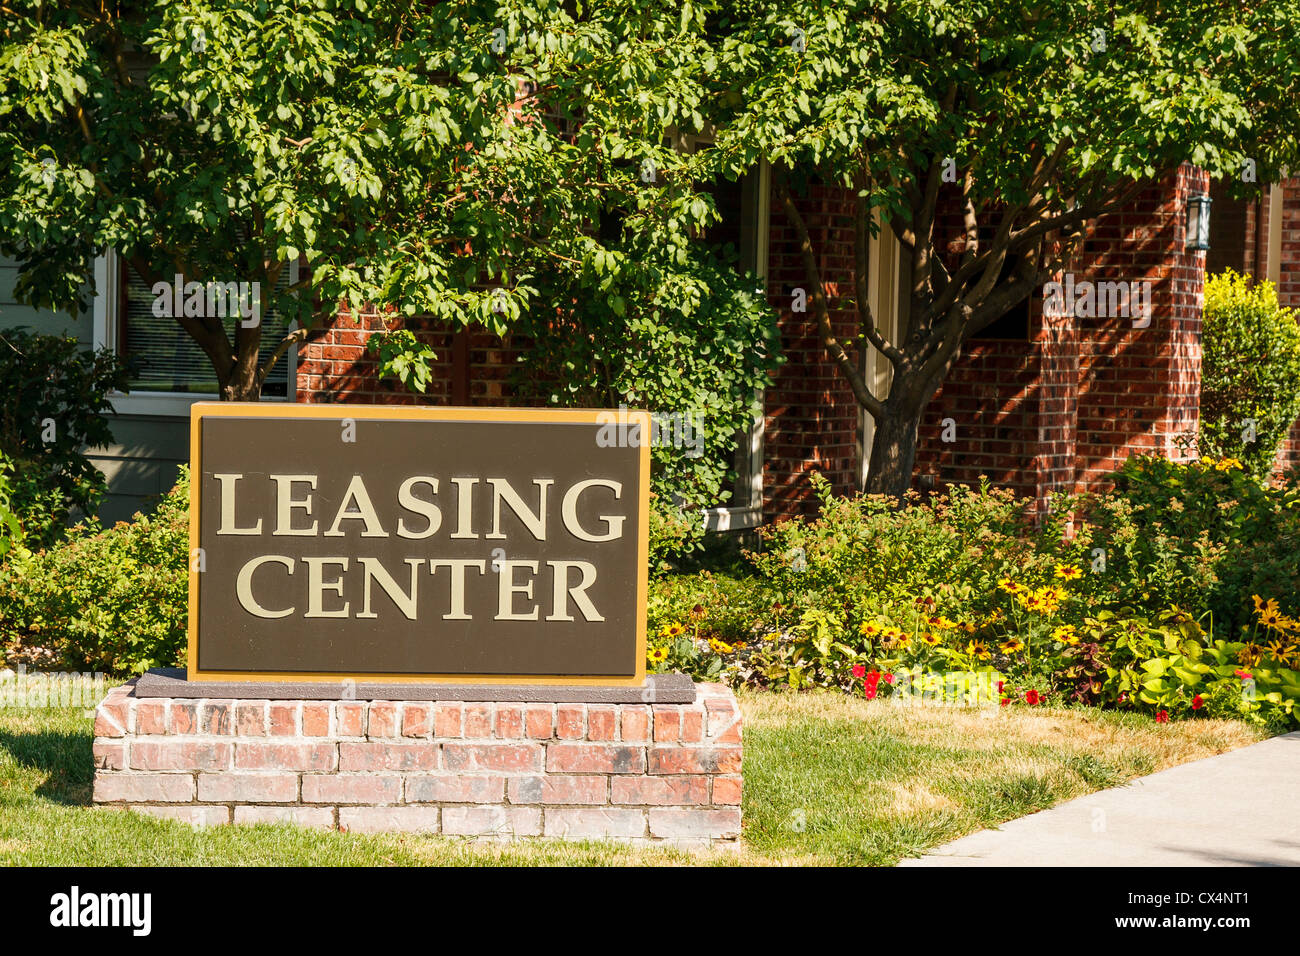 Leasing Center sign at a landscaped apartment complex Stock Photo